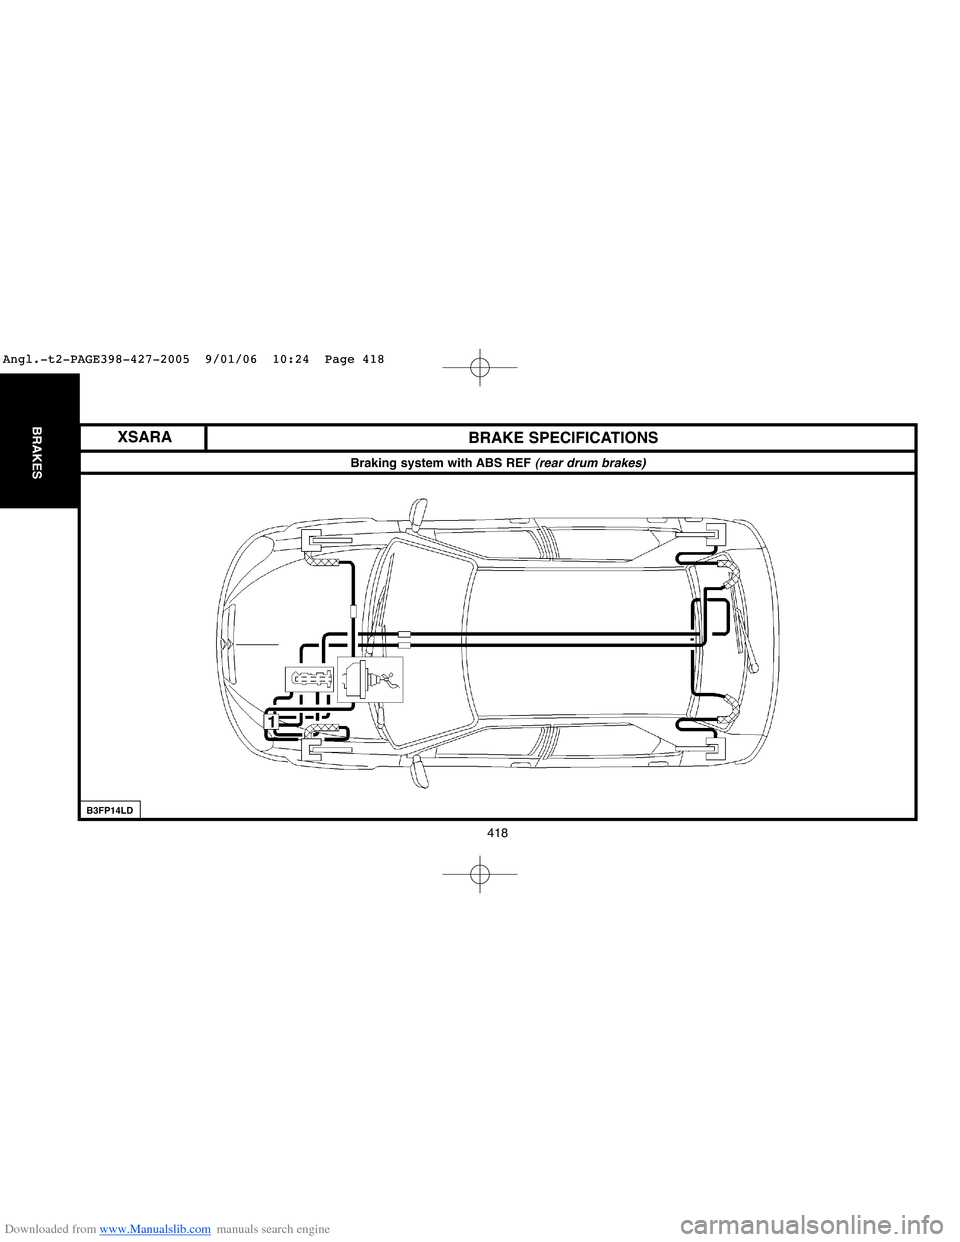 Citroen C4 2005 2.G Workshop Manual Downloaded from www.Manualslib.com manuals search engine 418
BRAKES
Braking system with ABS REF (rear drum brakes)
BRAKE SPECIFICATIONS
B3FP14LD
XSARA
Angl.-t2-PAGE398-427-2005  9/01/06  10:24  Page 4